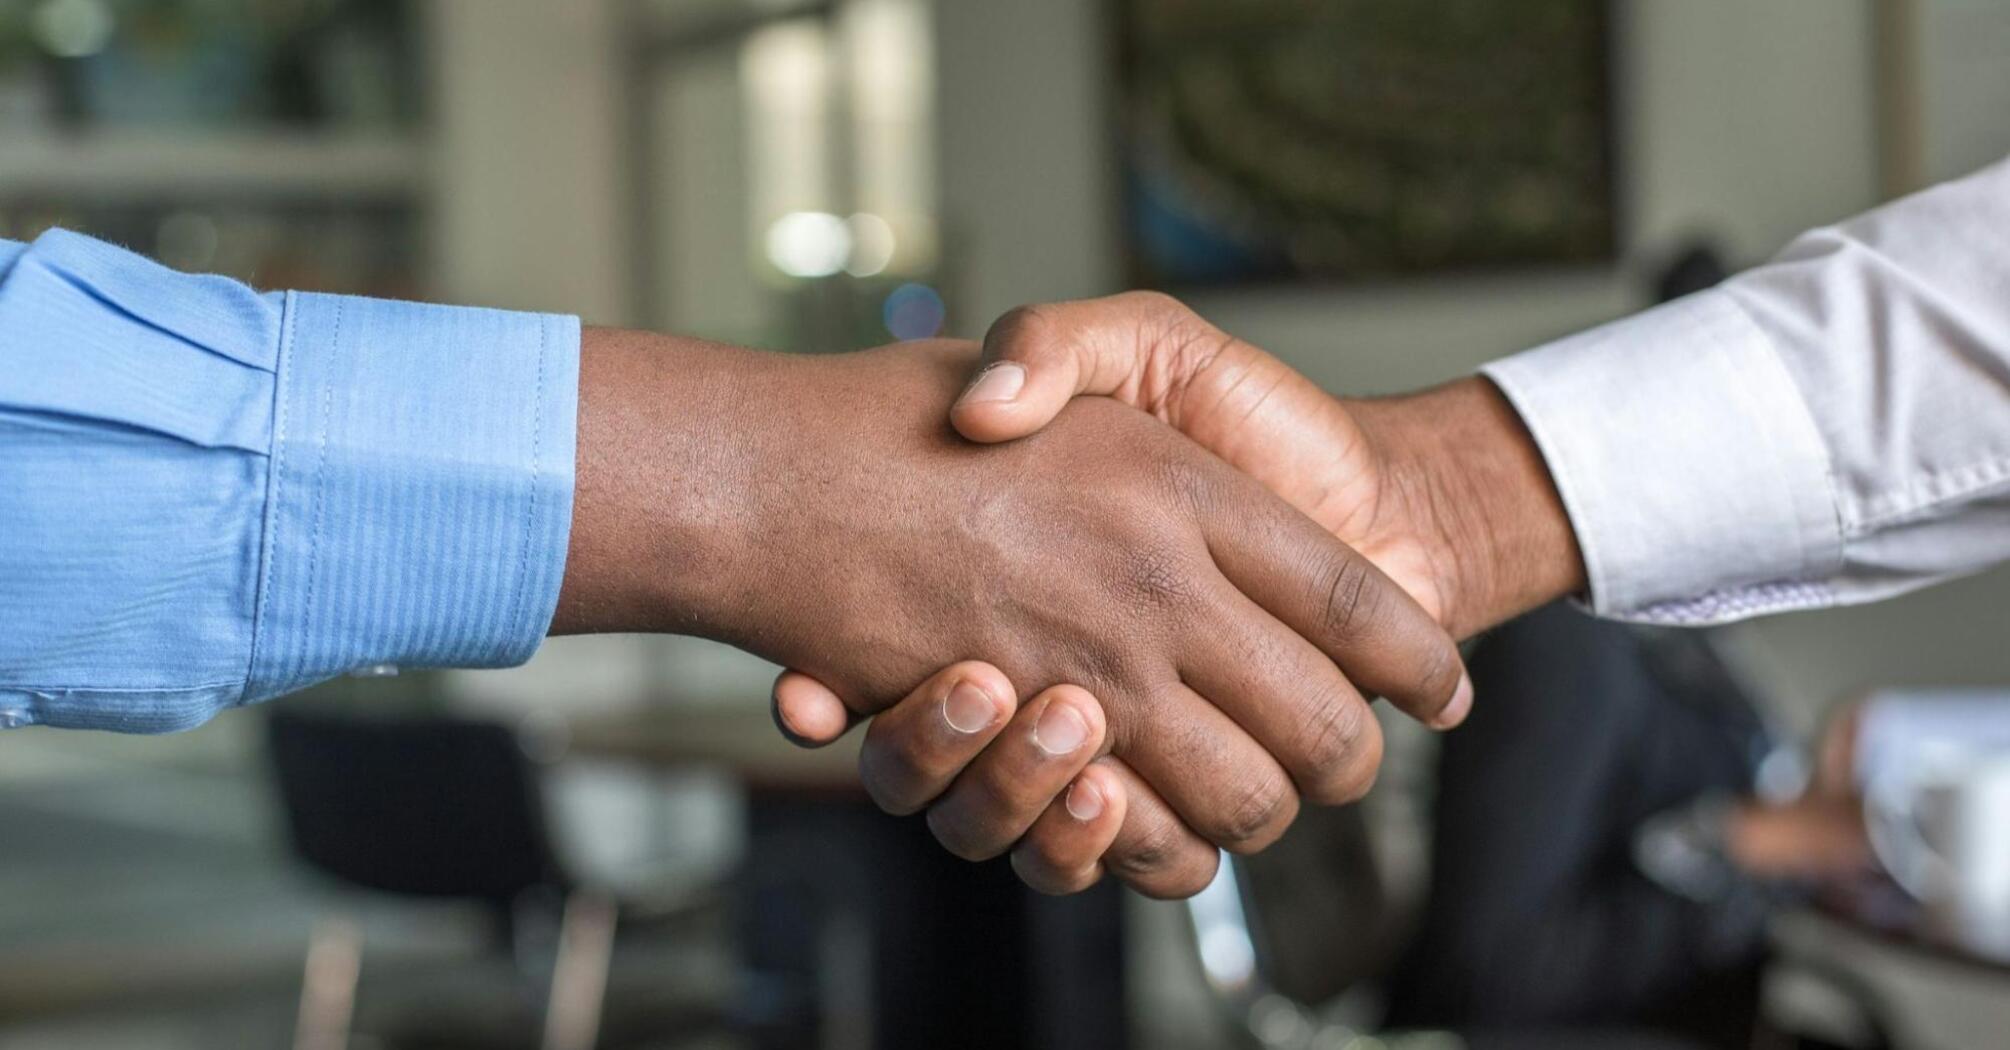 Handshake between two individuals in a business setting